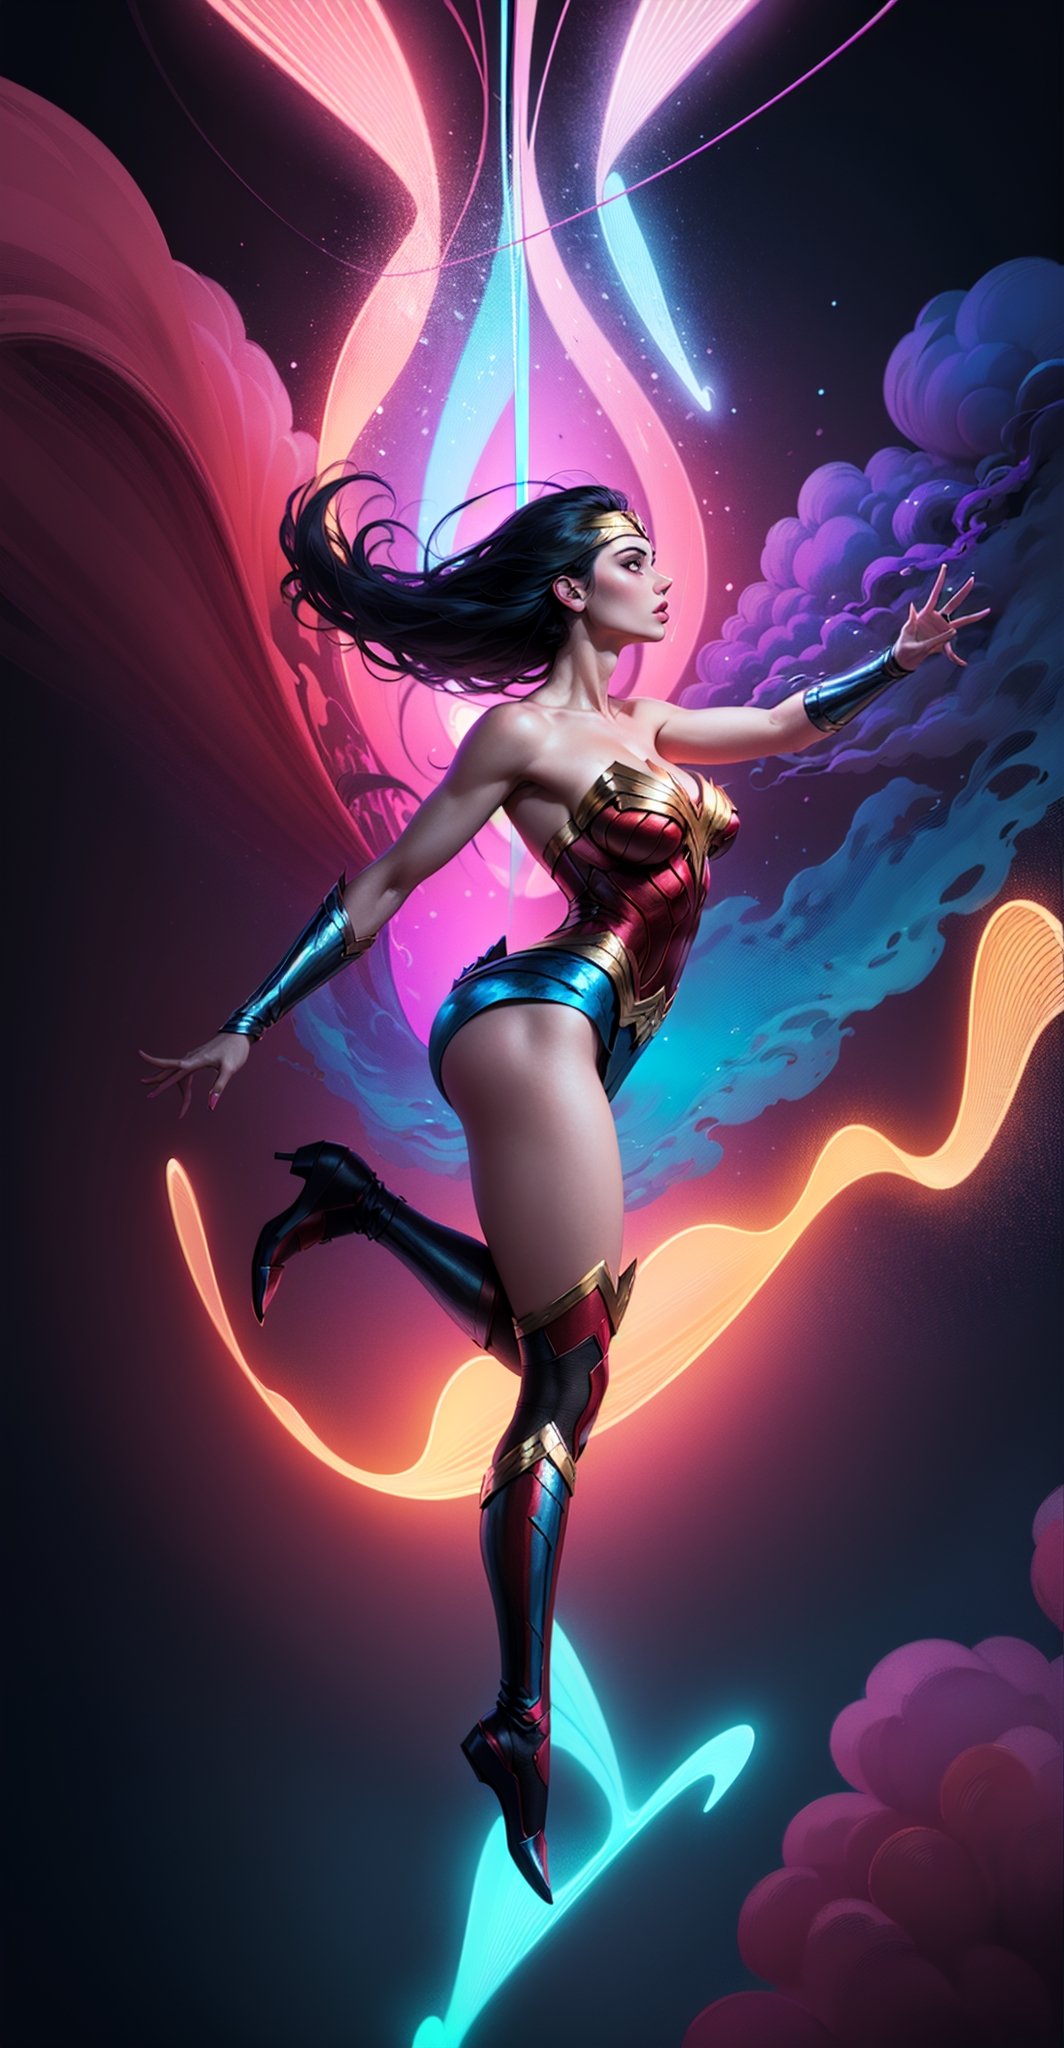 Wonder Woman (big tits),(( side view,)),((full body)),((floating in air)),masterpiece, best quality, ((abstract, psychedelic, neon, smoke , background)),(creative:1.3), sy3, SMM, fantasy00d